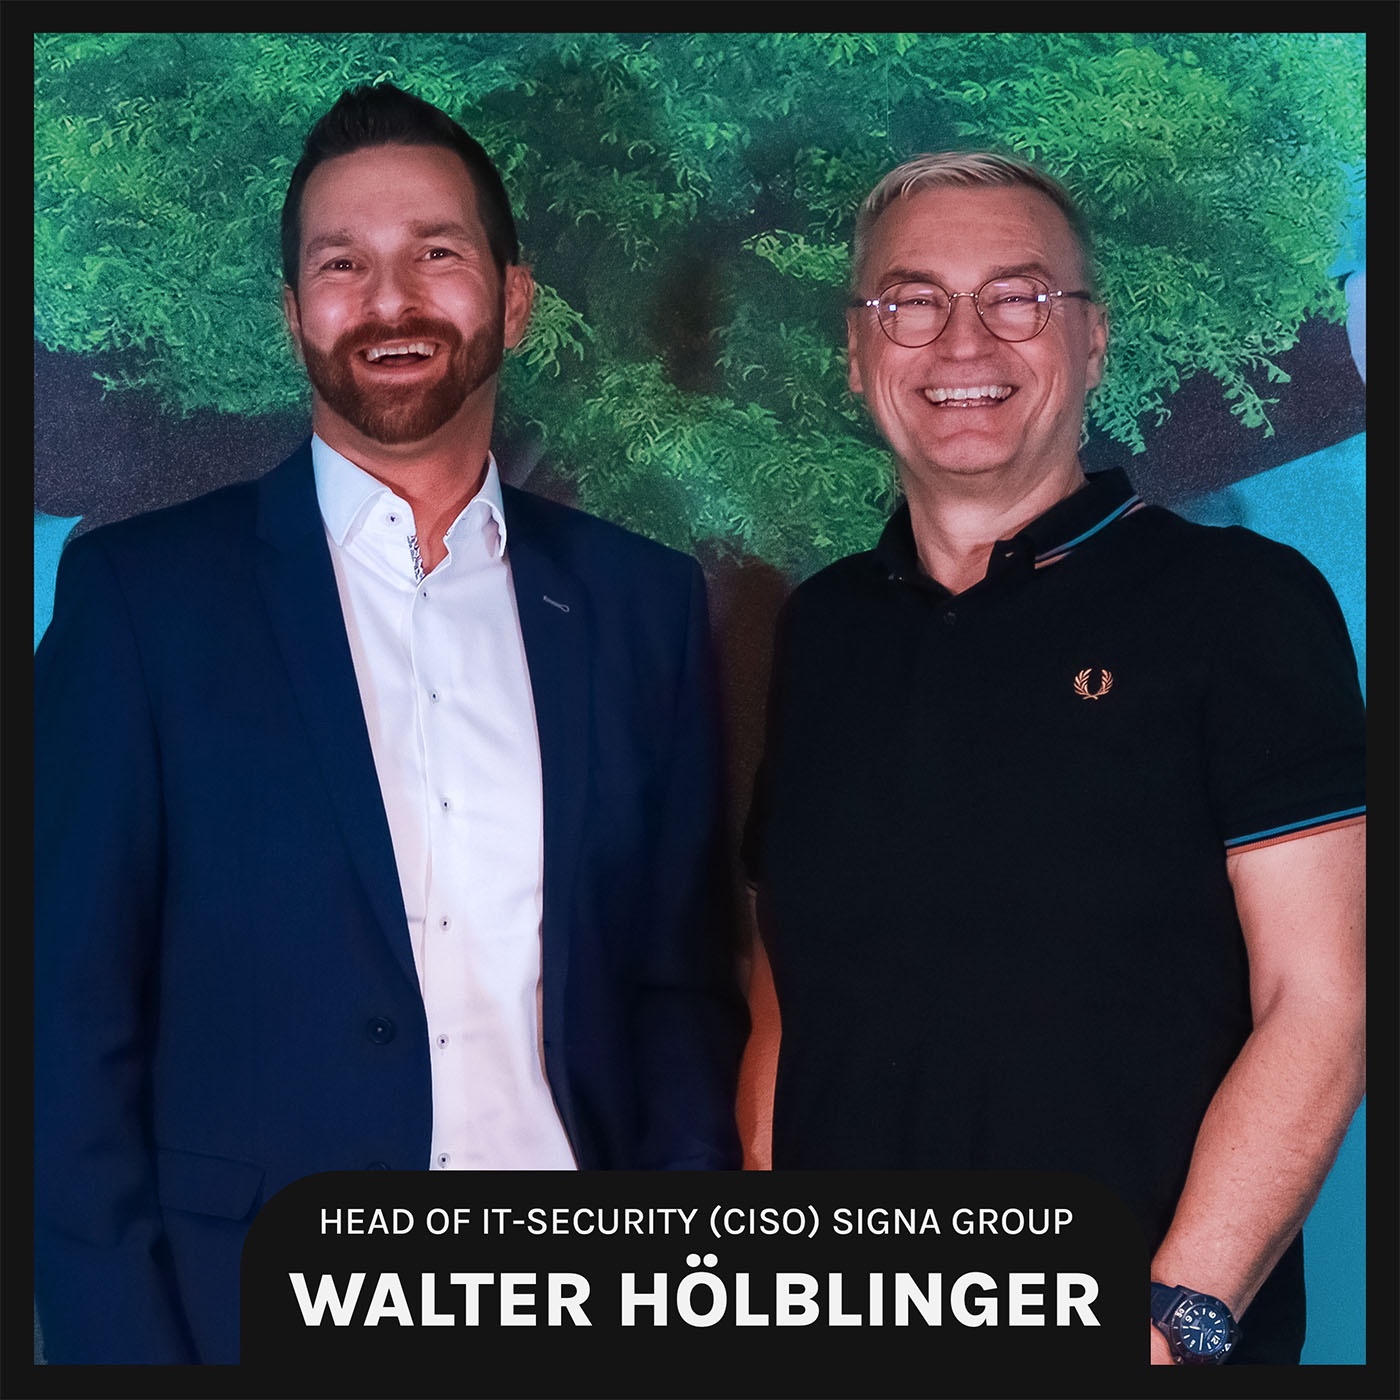 123C Podcast mit Head of IT-Security (CISO) Signa Group Walter Hölblinger (#13)